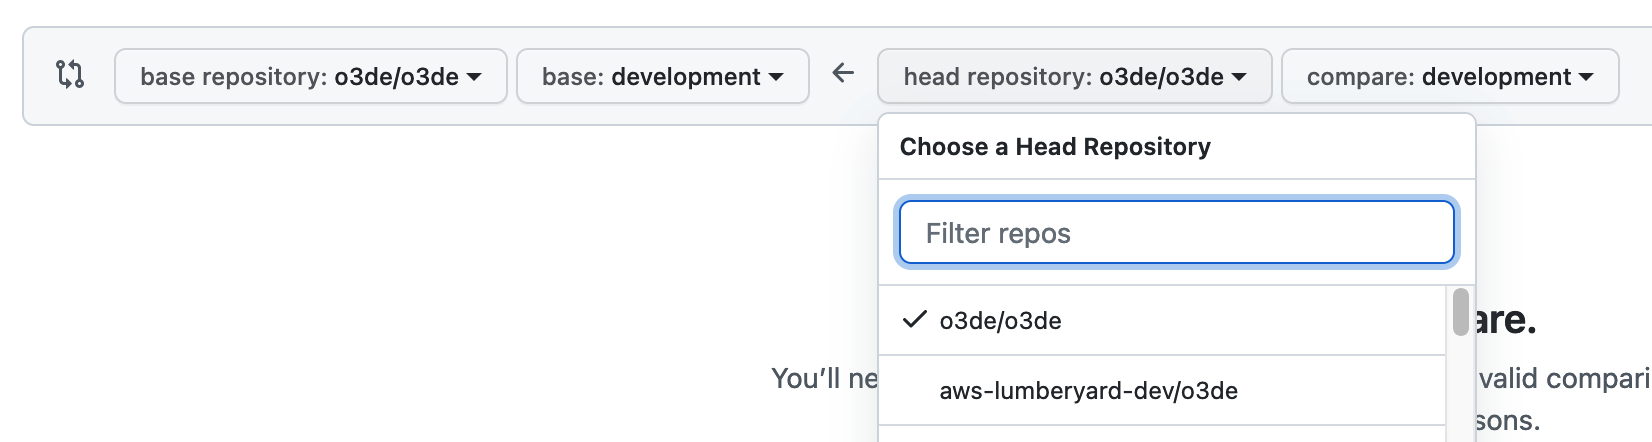 Creating a pull request from your fork to o3de/development.